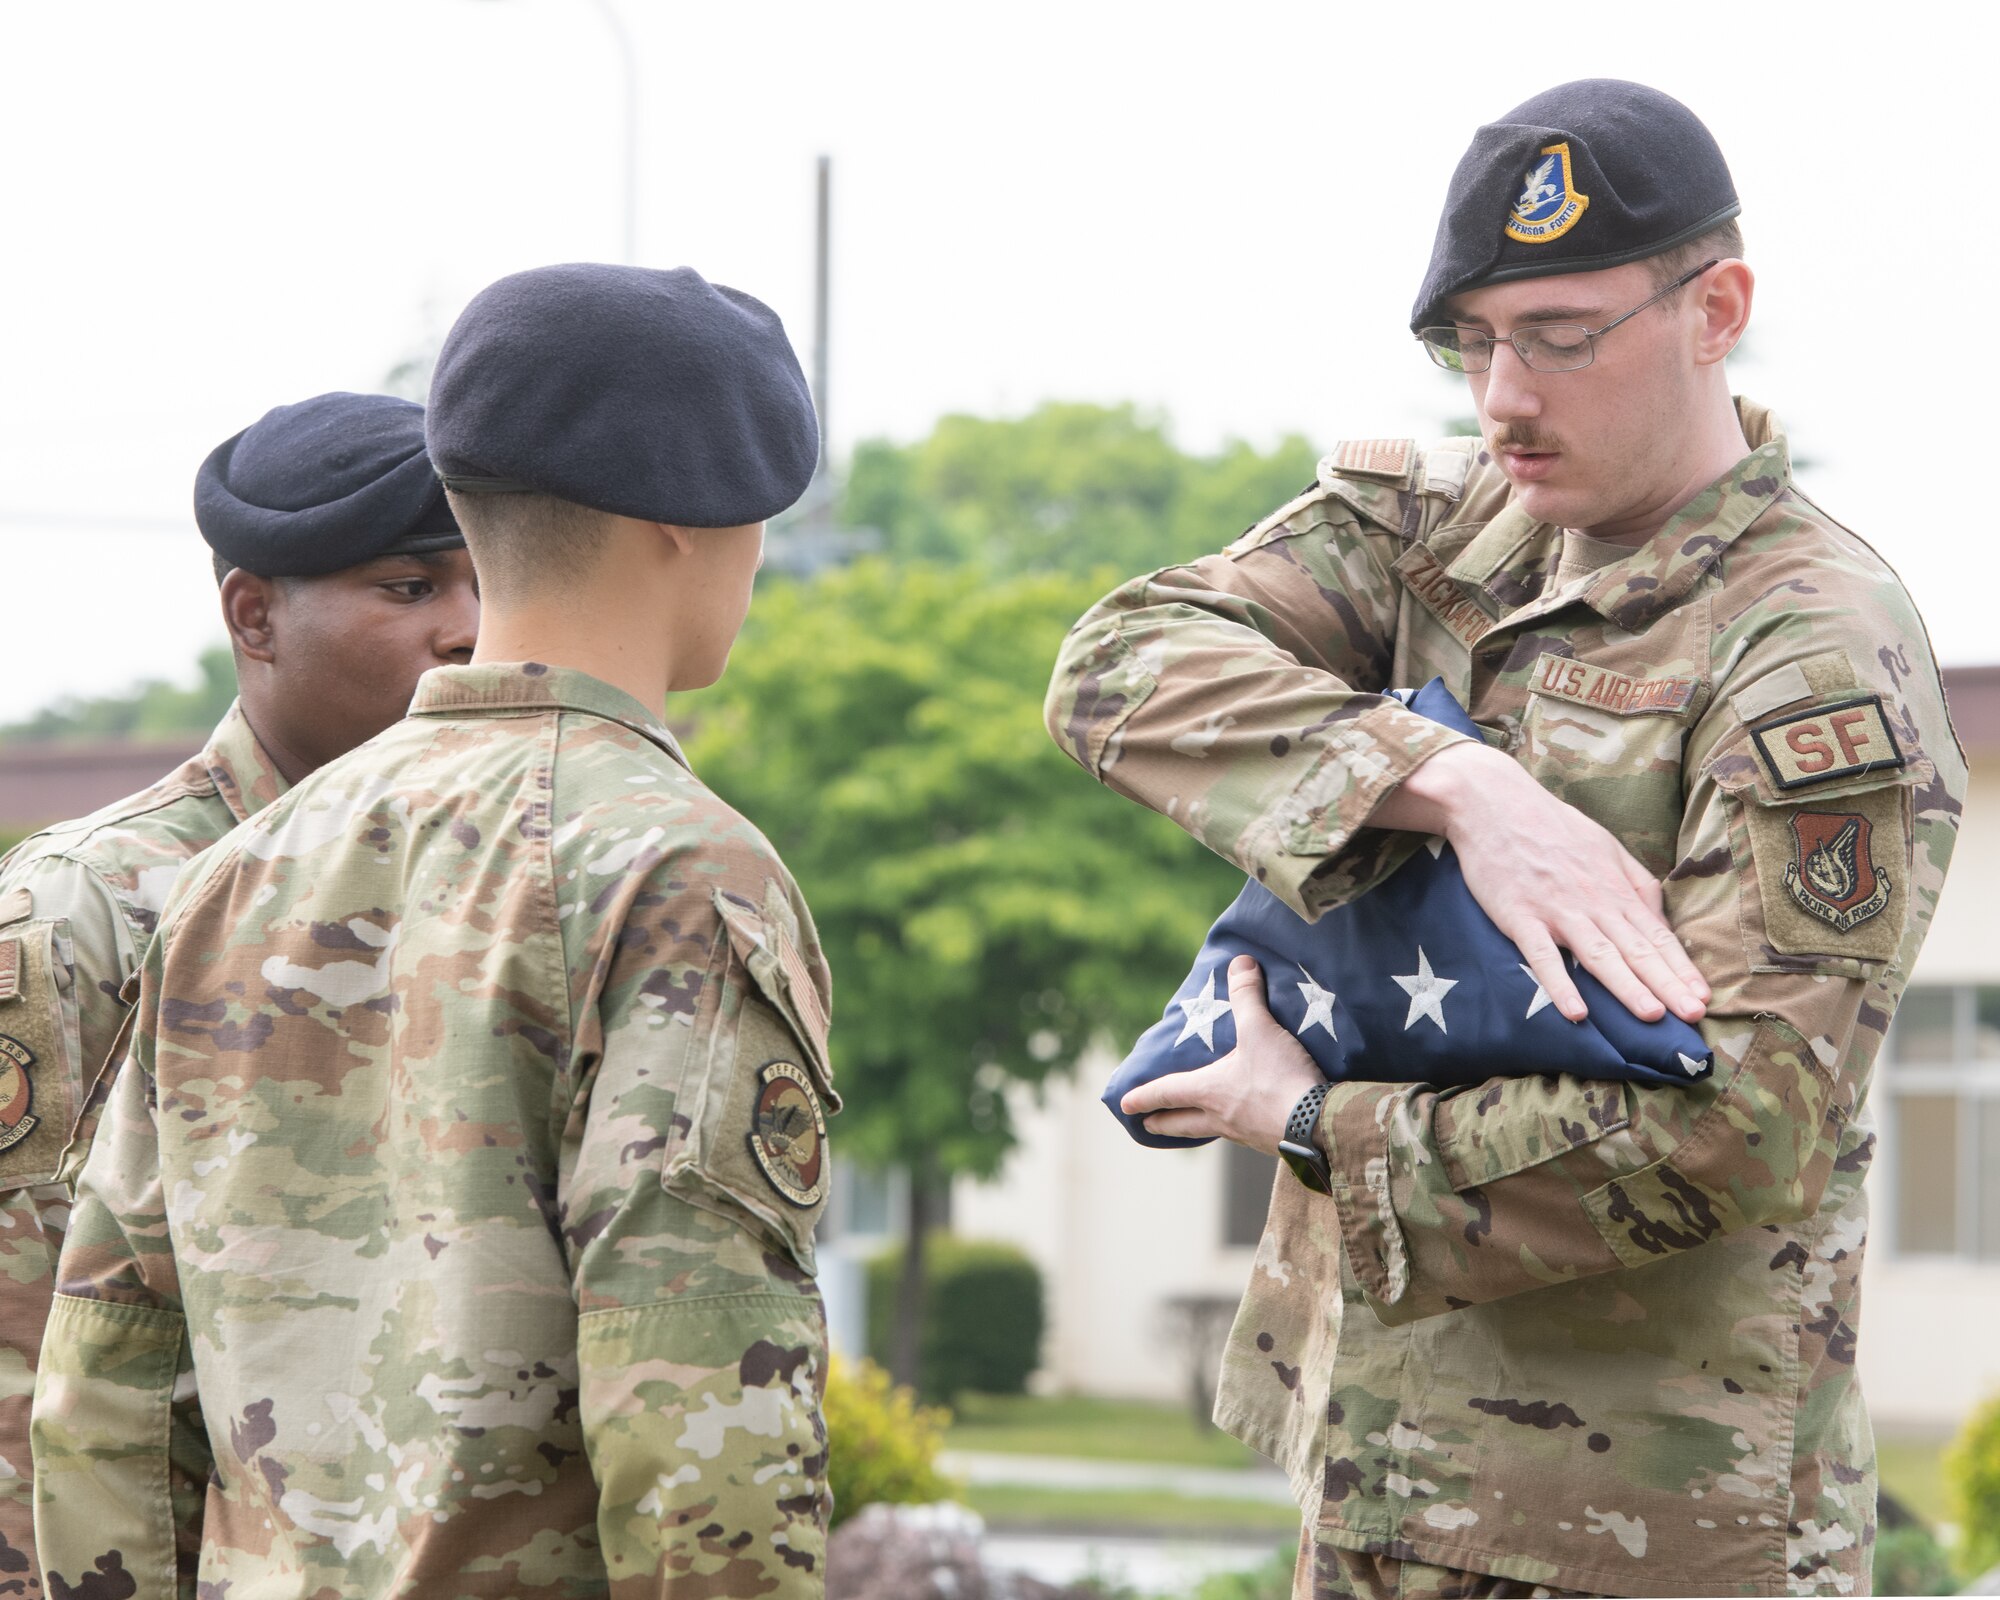 Airman 1st Class Derek Zickafoose, 374th Security Forces Squadron security response team member, dresses the American Flag during a police retreat ceremony at Yokota Air Base, Japan, May 20, 2022. The 374th SFS held the ceremony during Police Week to honor law enforcement personnel as well as recognize the dangers and risks they face every day. (U.S. Air Force photo by Machiko Arita)